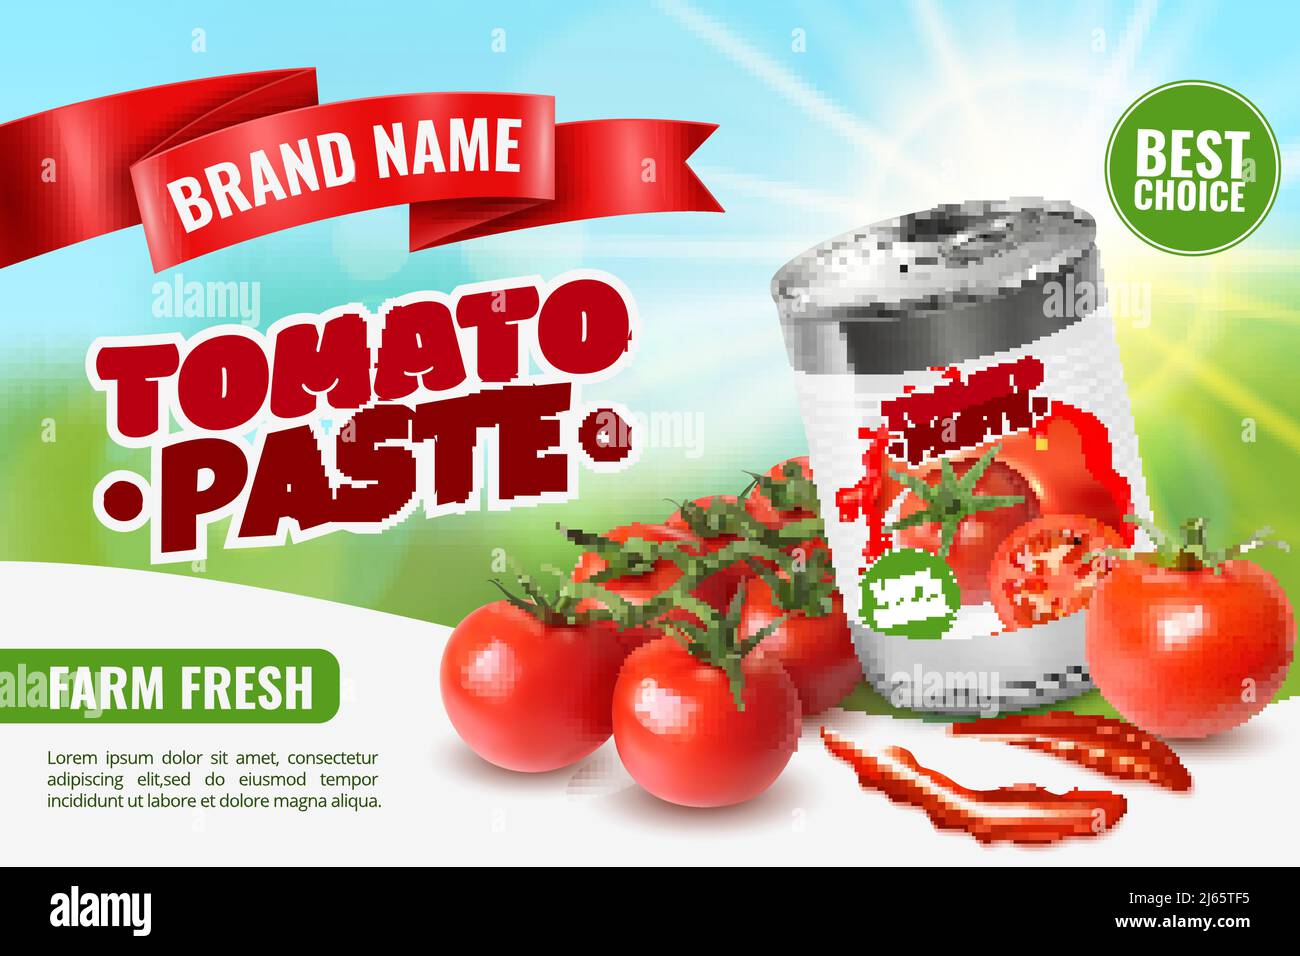 Realistic tomato ads poster with branded metal can container editable text and images of ripe tomatoes vector illustration Stock Vector